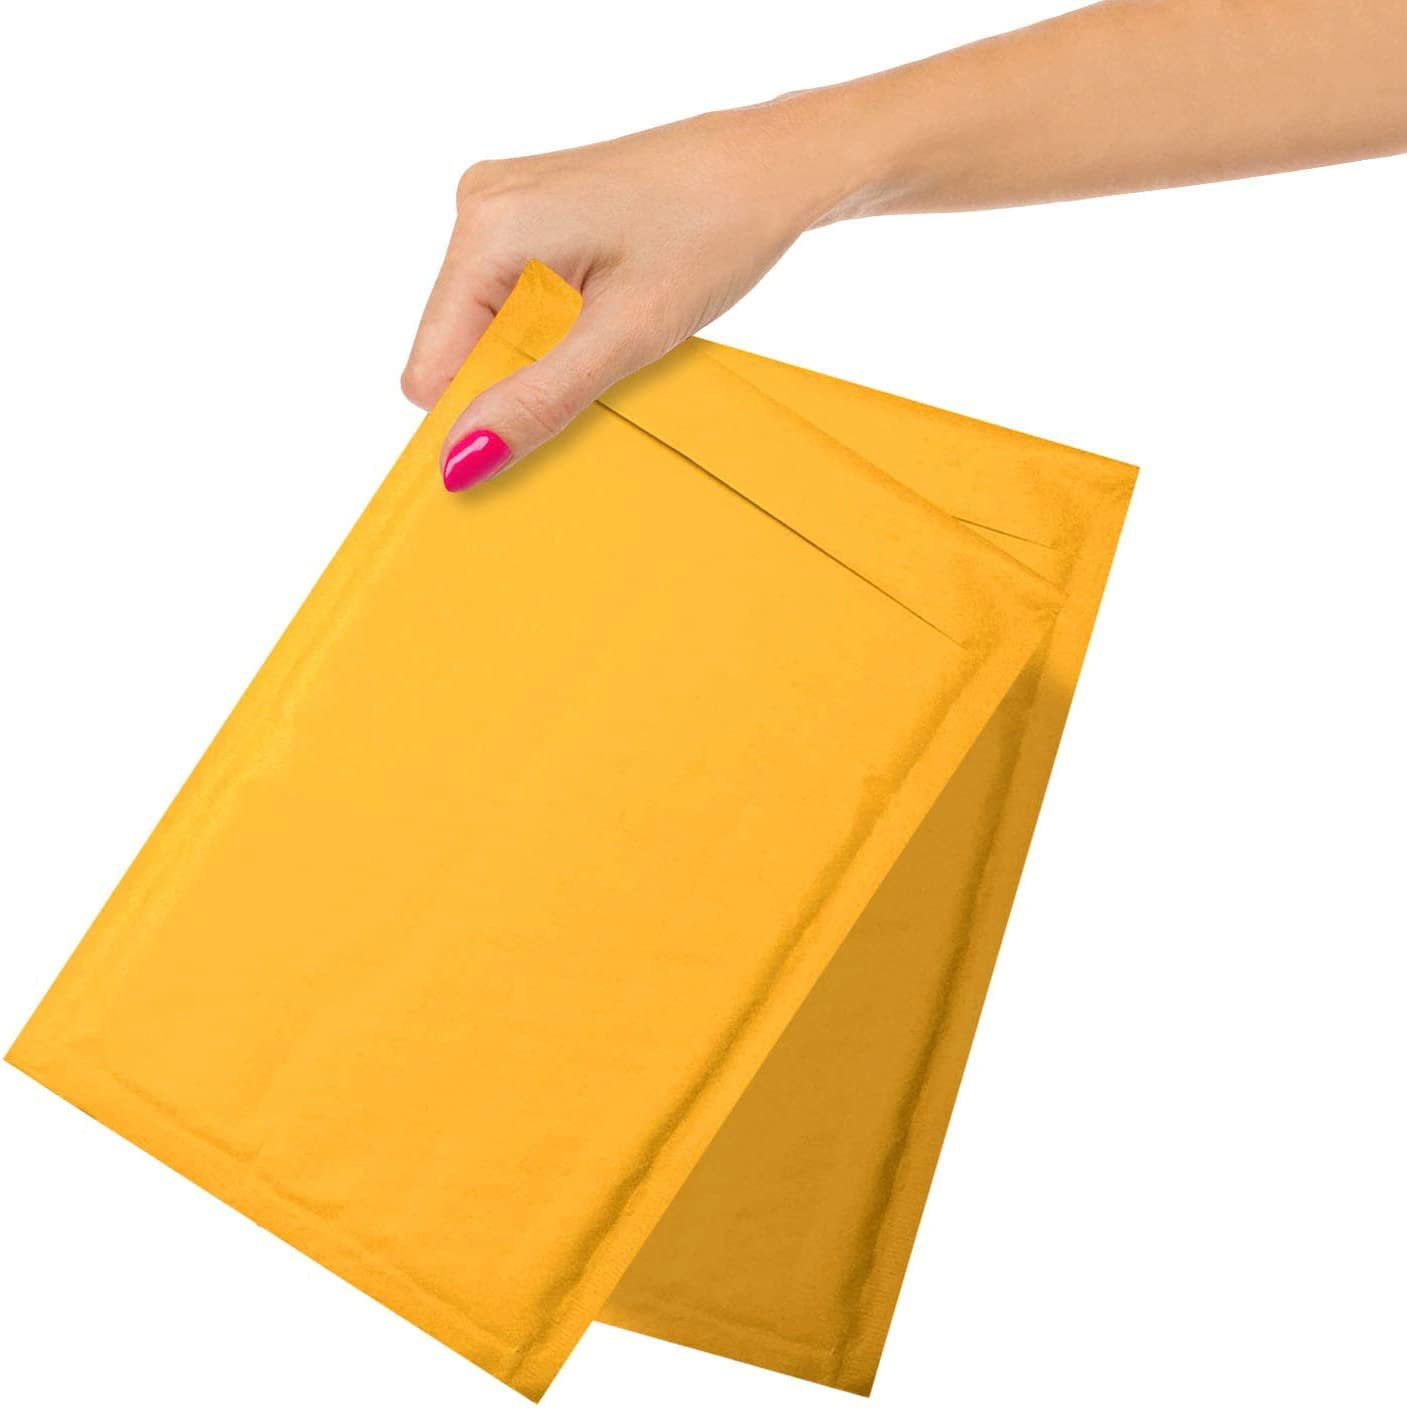 Secure Seal #CD 7.25x8 Kraft Bubble Mailers Padded Shipping Envelopes Pack of 250